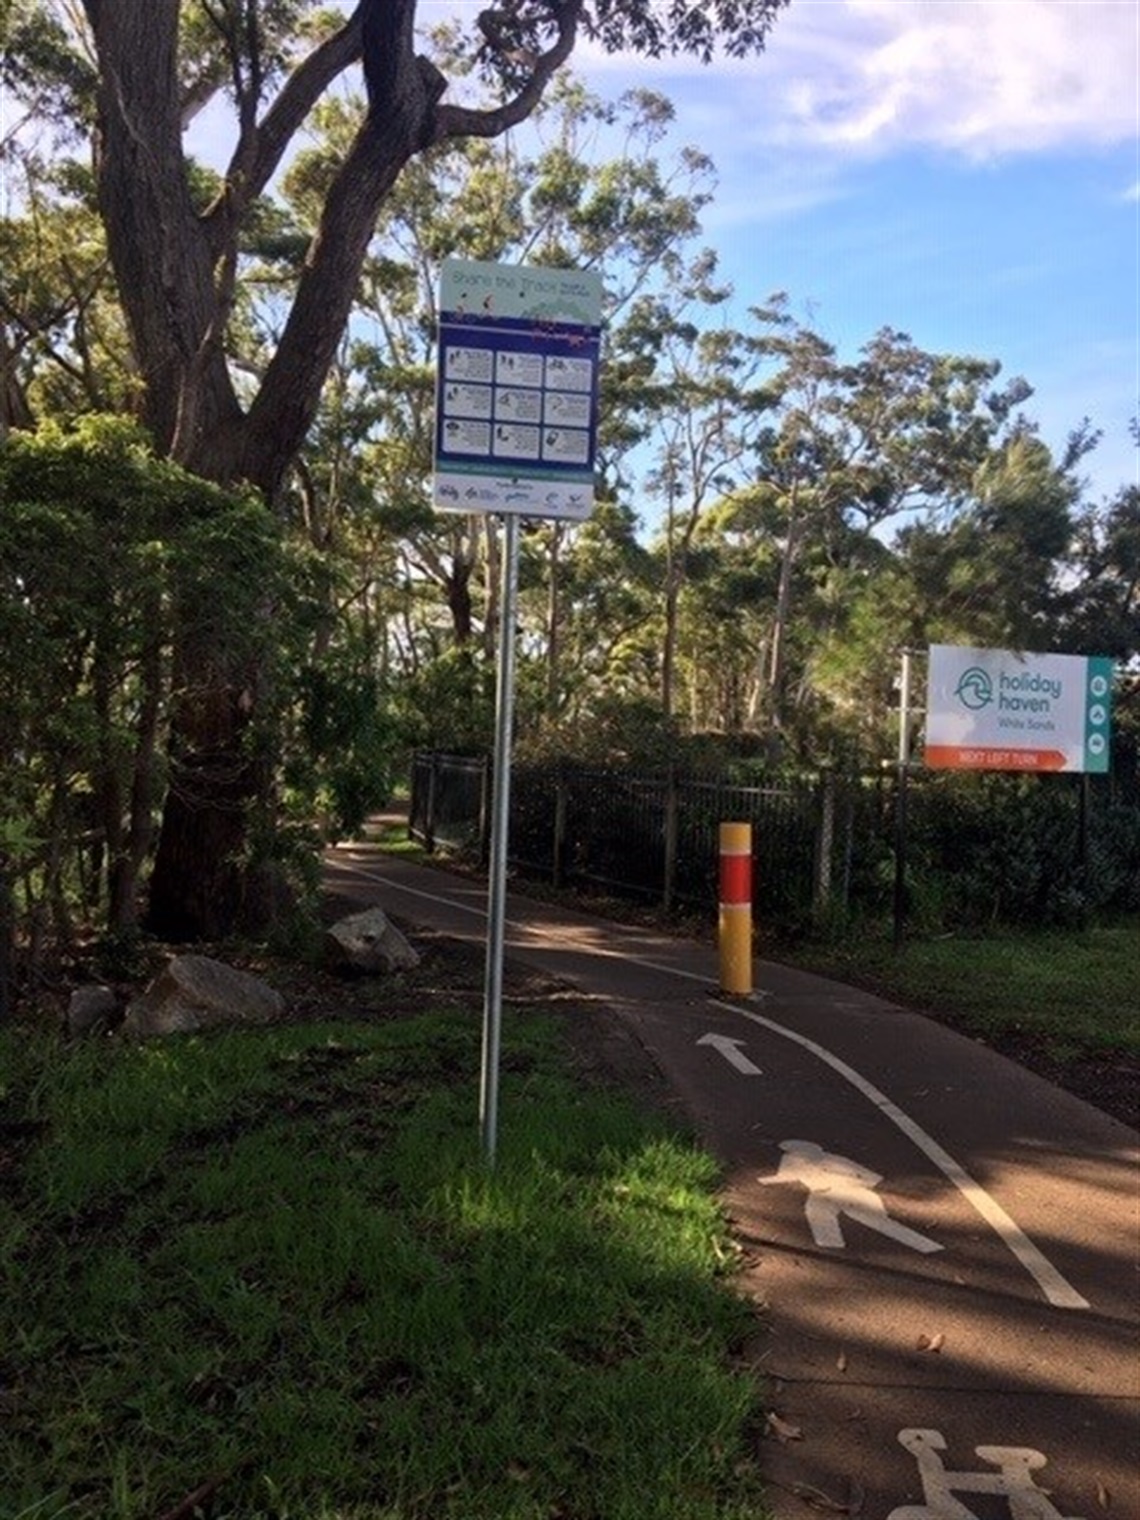 Share theTrack signs in Huskisson